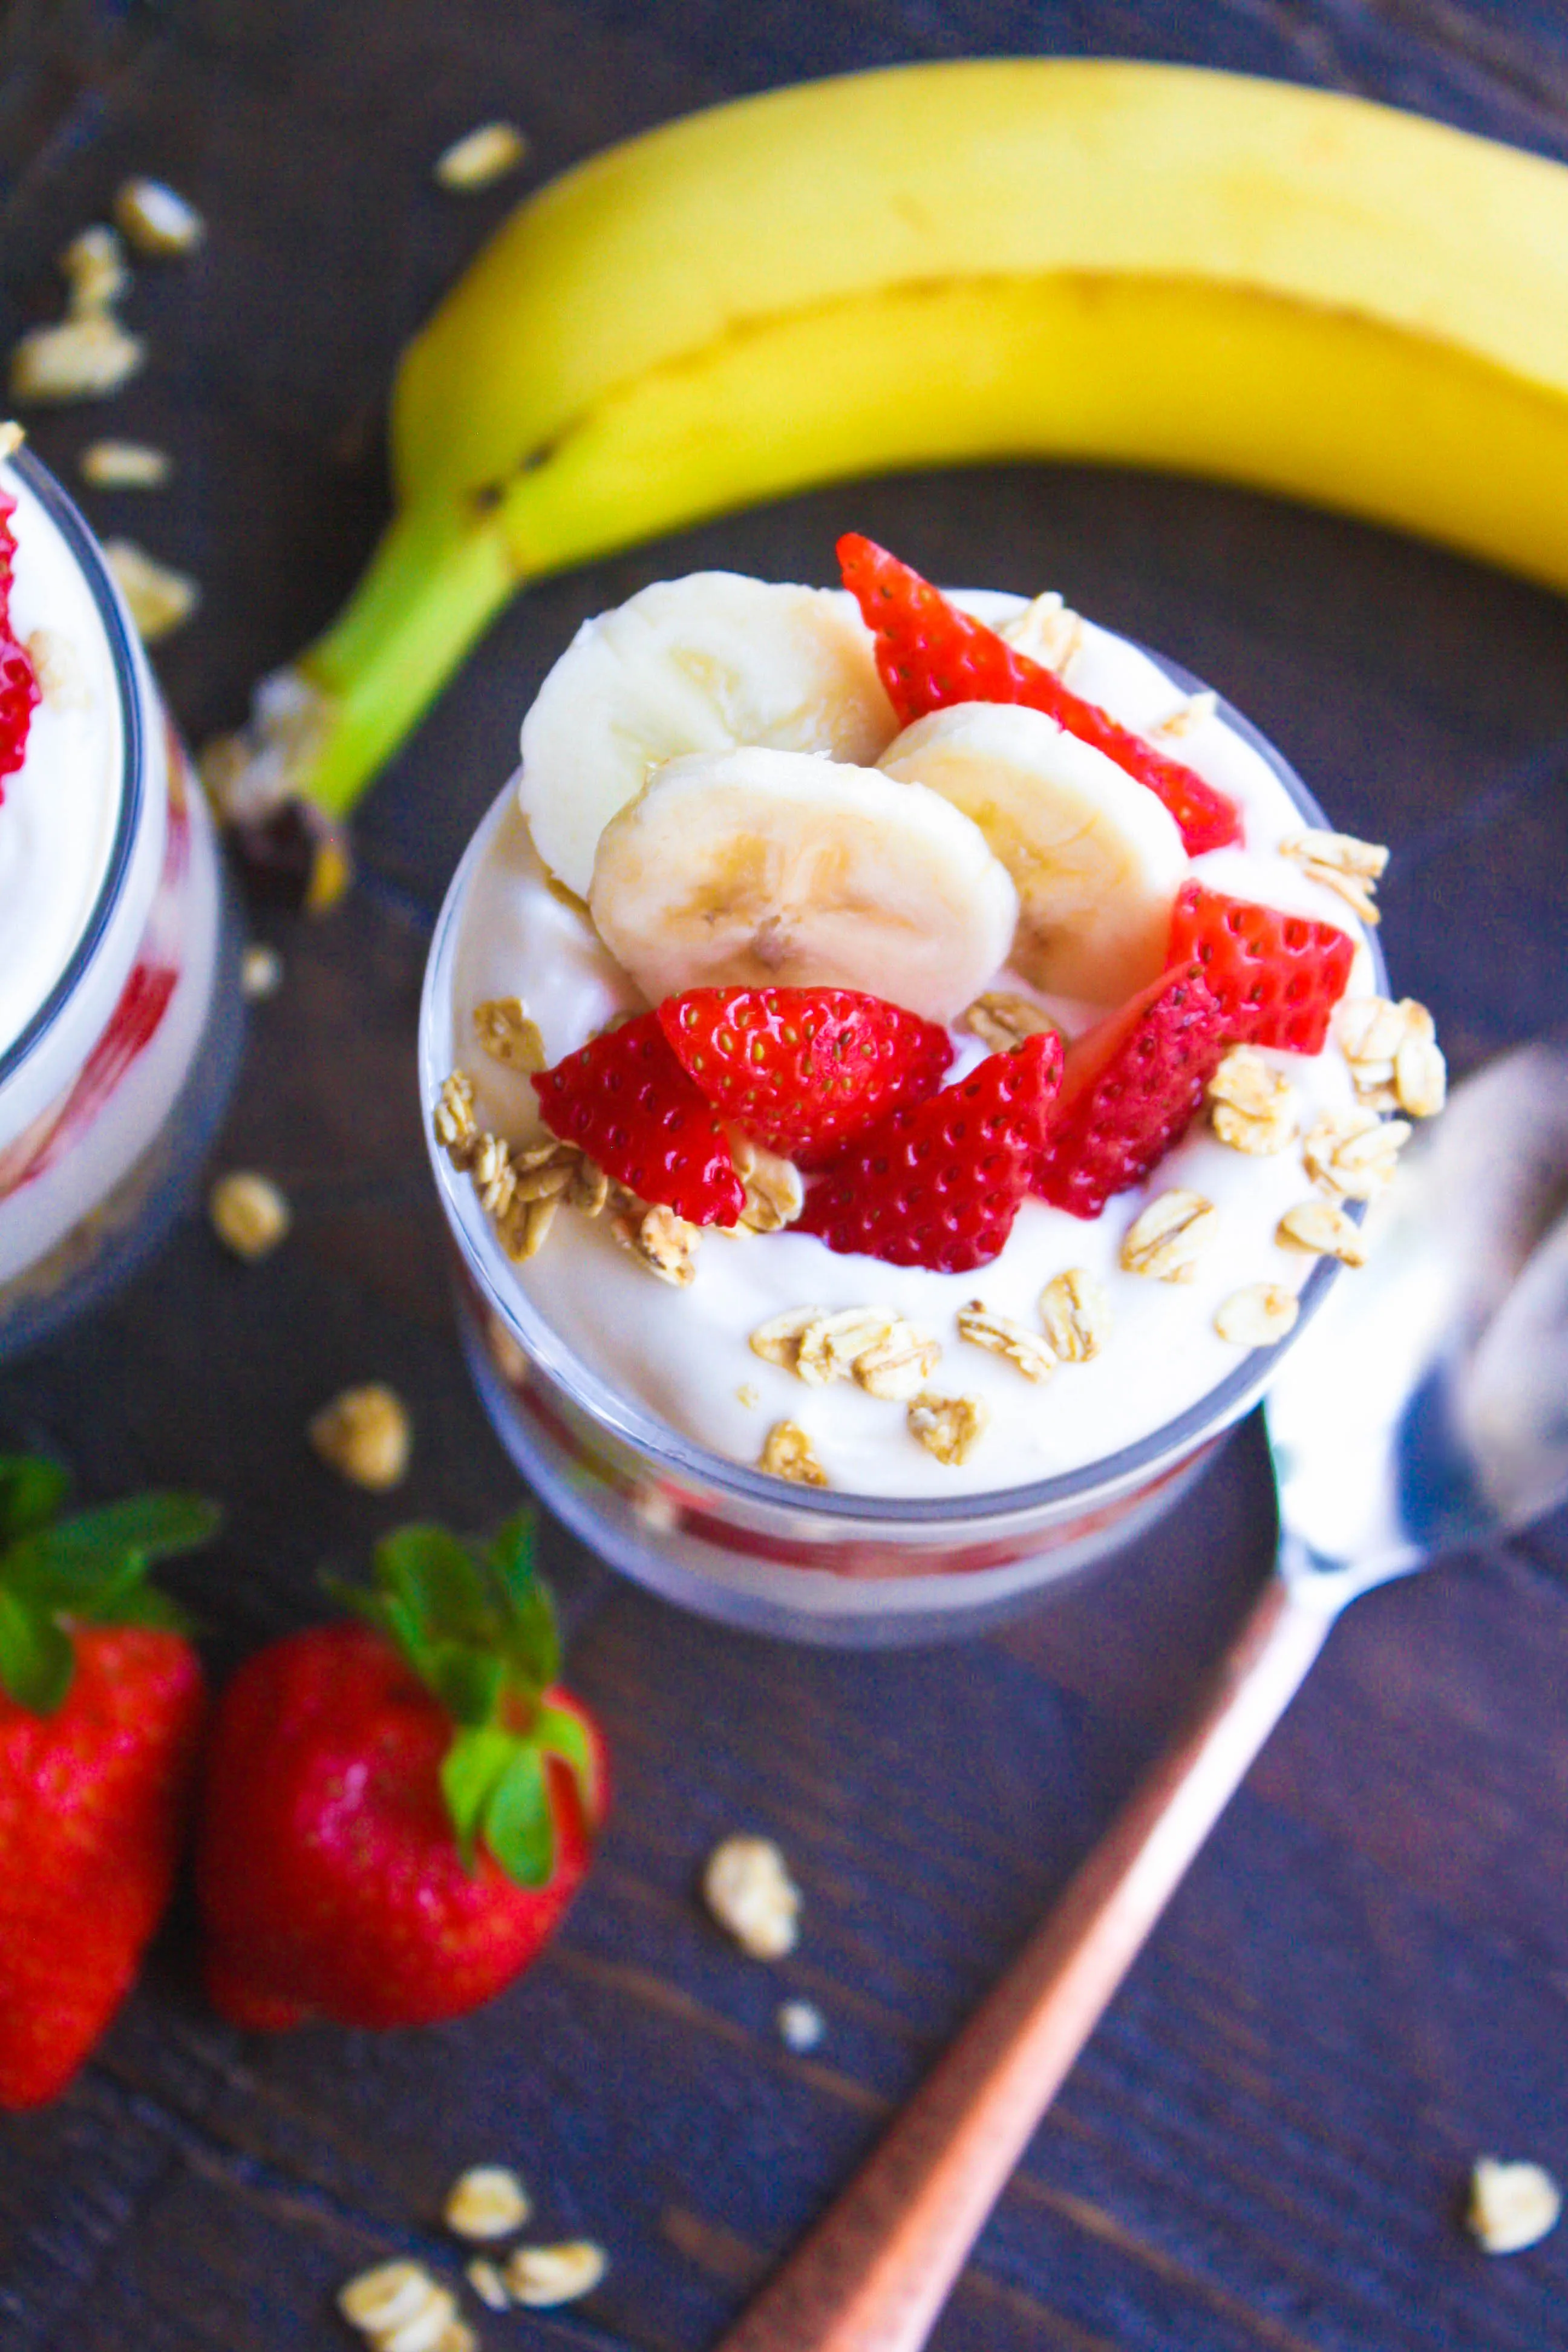 No Bake Strawberry-Banana Cheesecake Parfaits are so easy to make. They're delicious with fresh fruit layered with other goodies. You'll love No Bake Strawberry-Banana Cheesecake Parfaits!